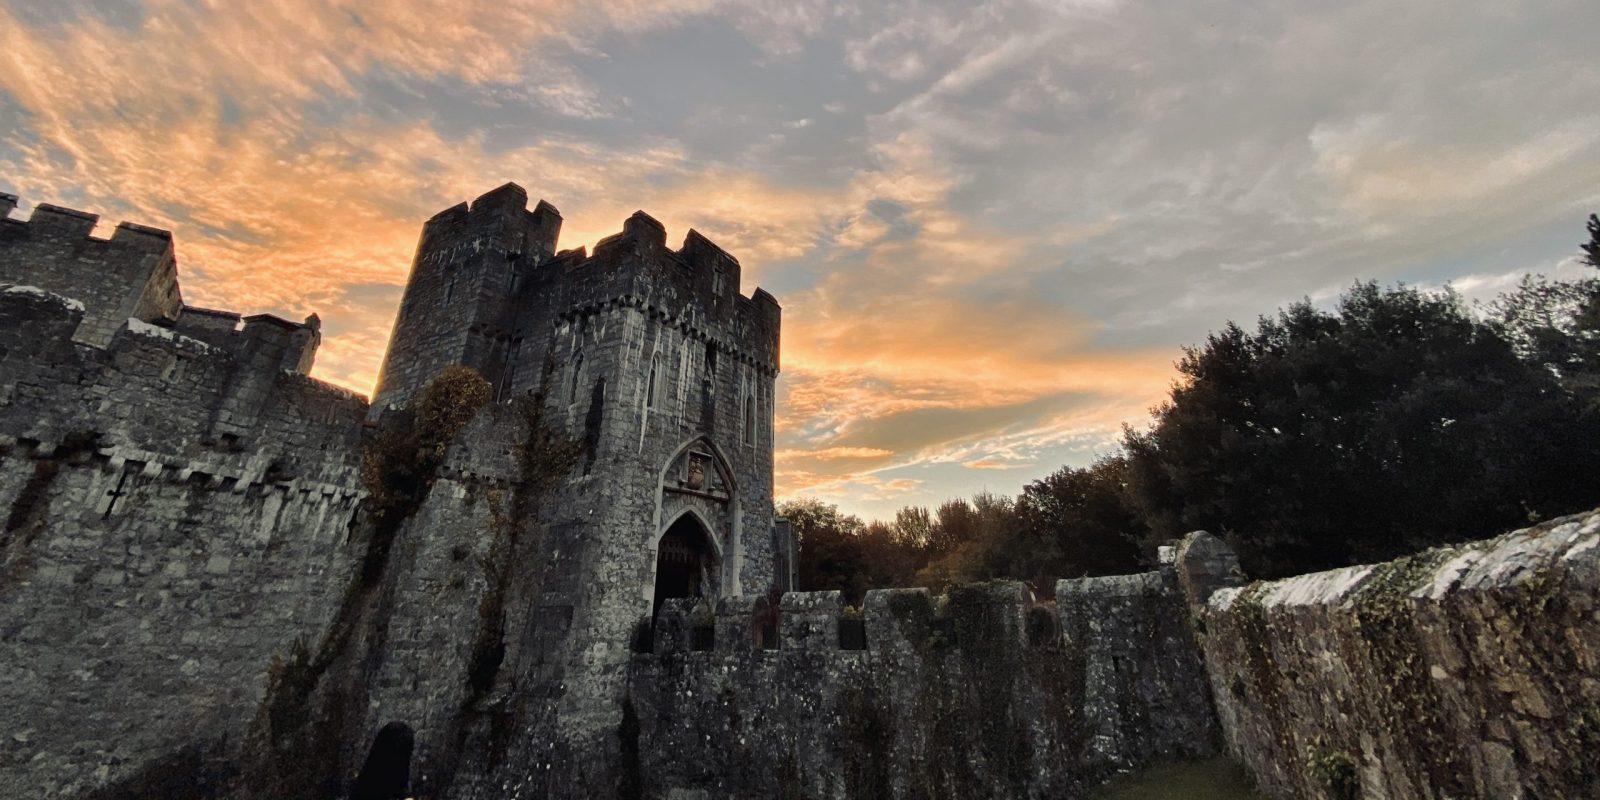 Halloween event image - cloudy image of St Donat's Castle